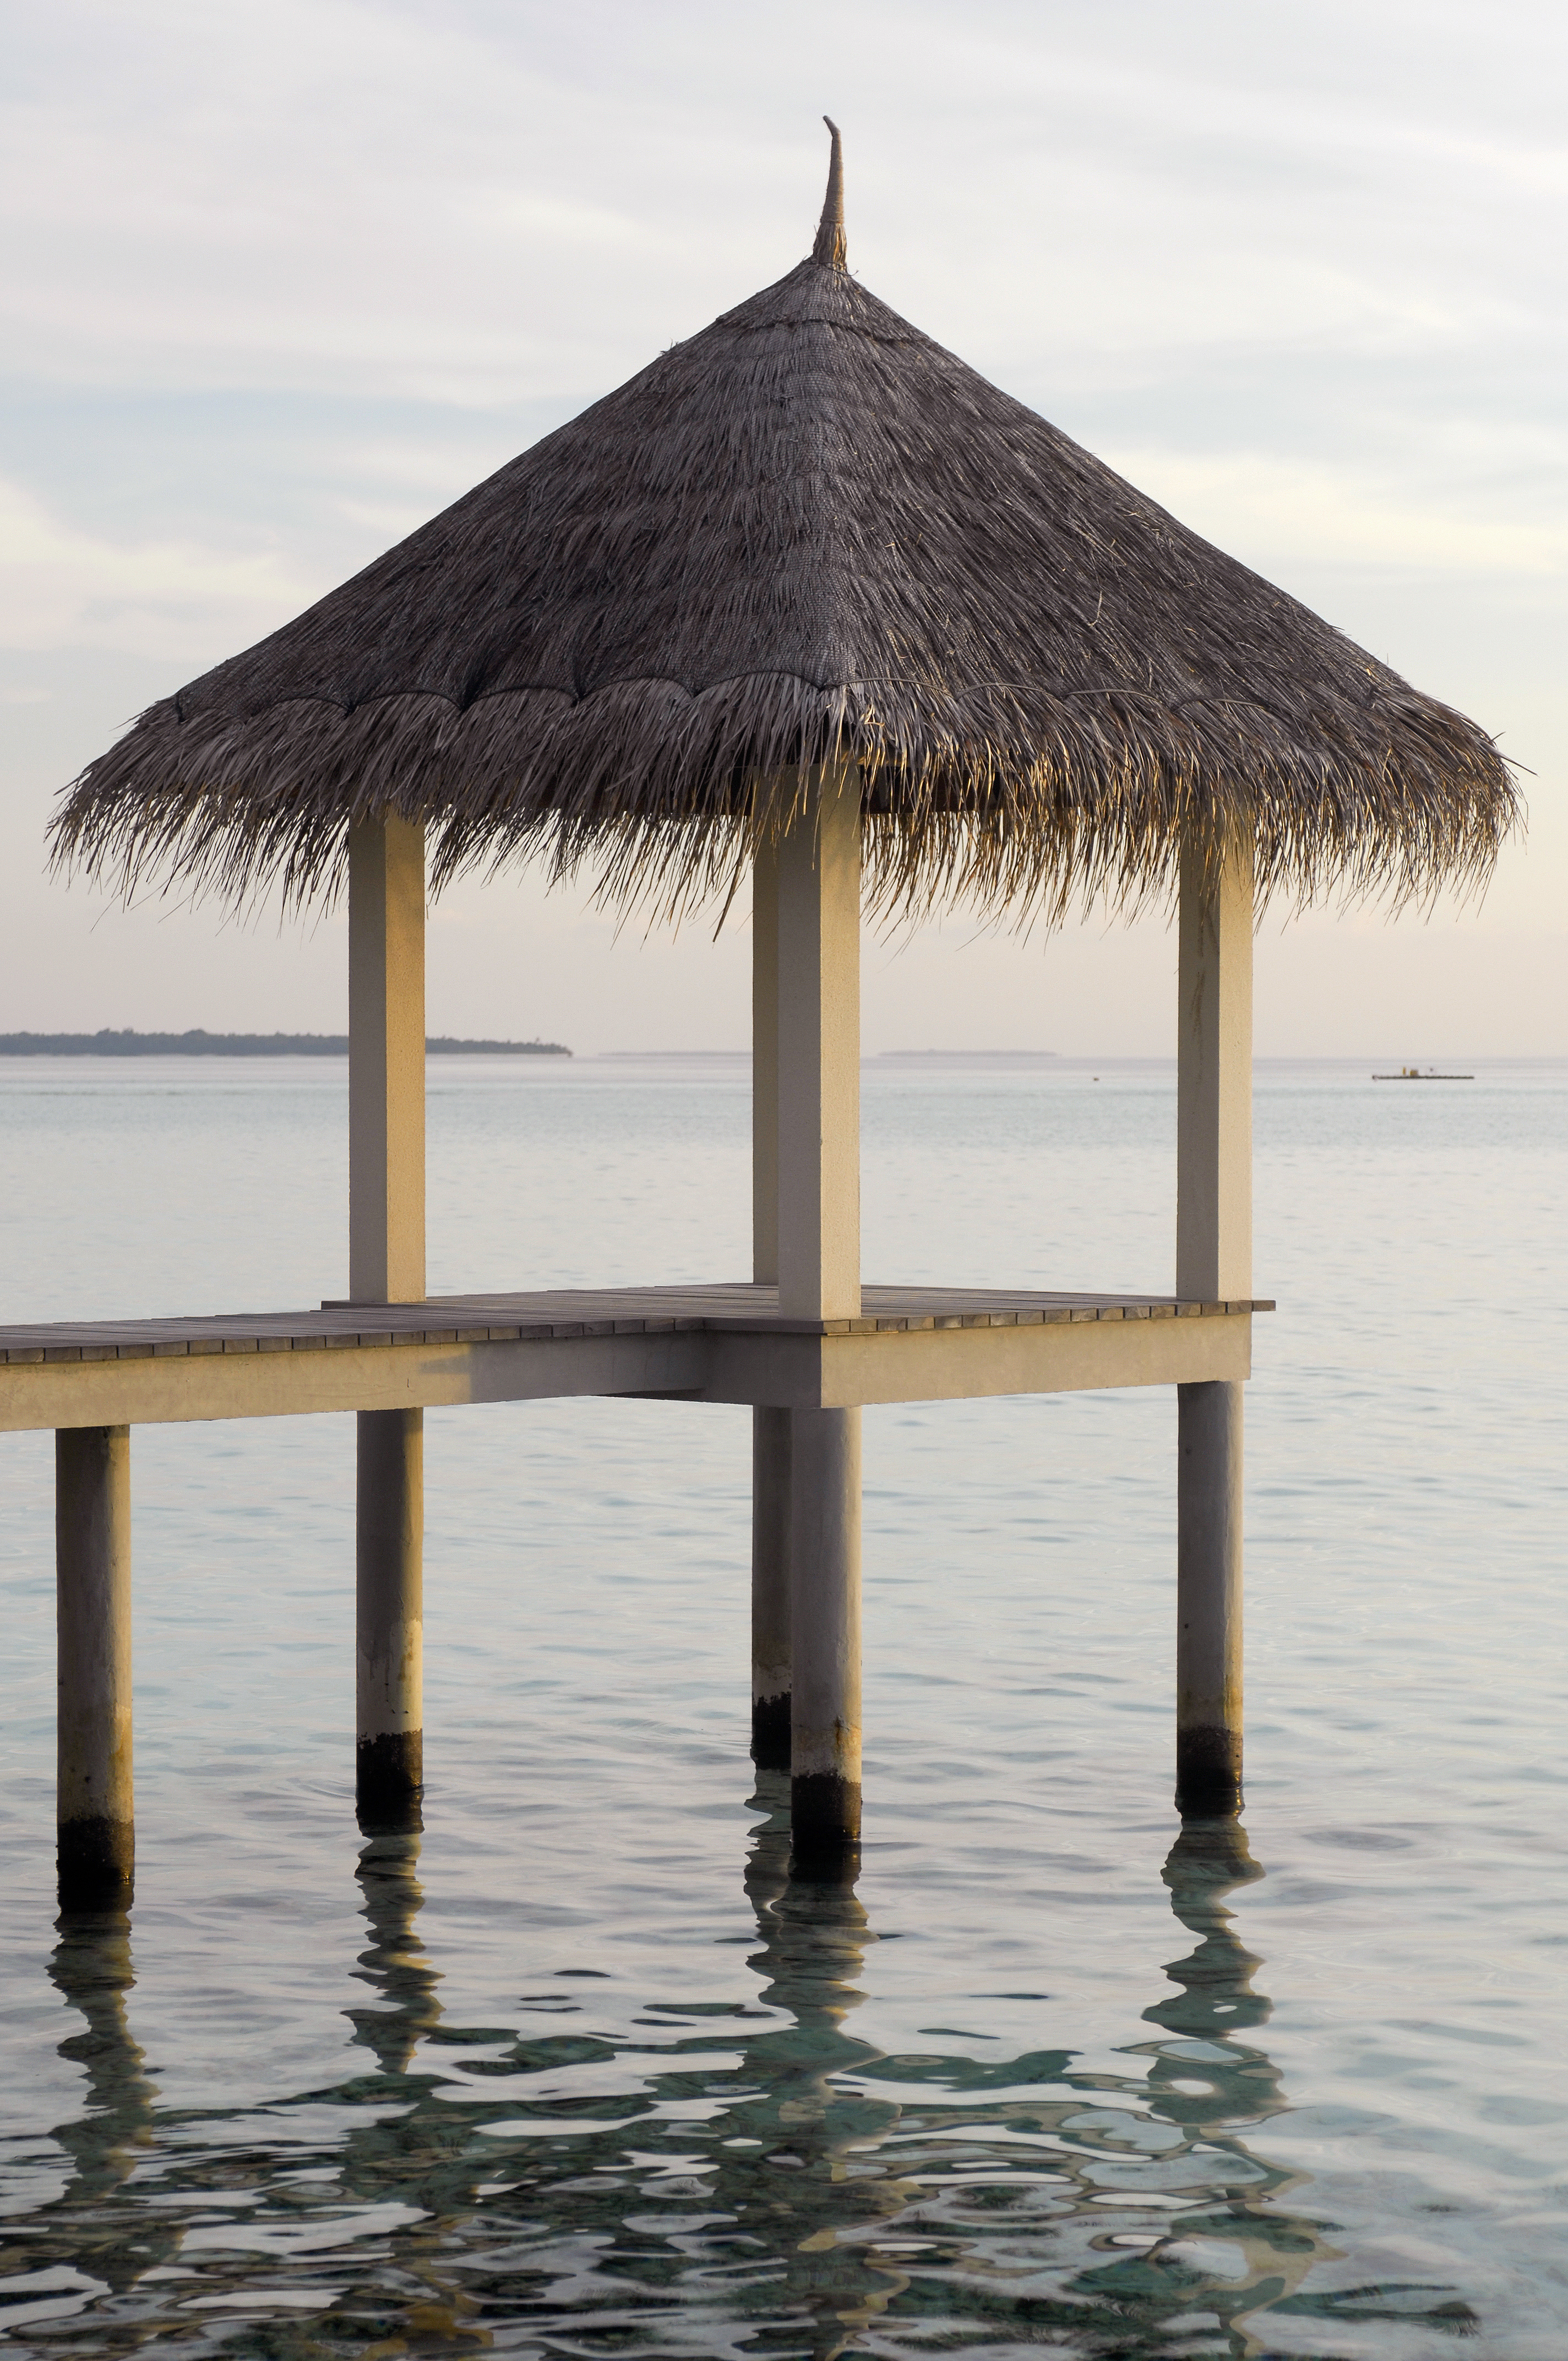 Thatched-roof in the Maldive Islands 01